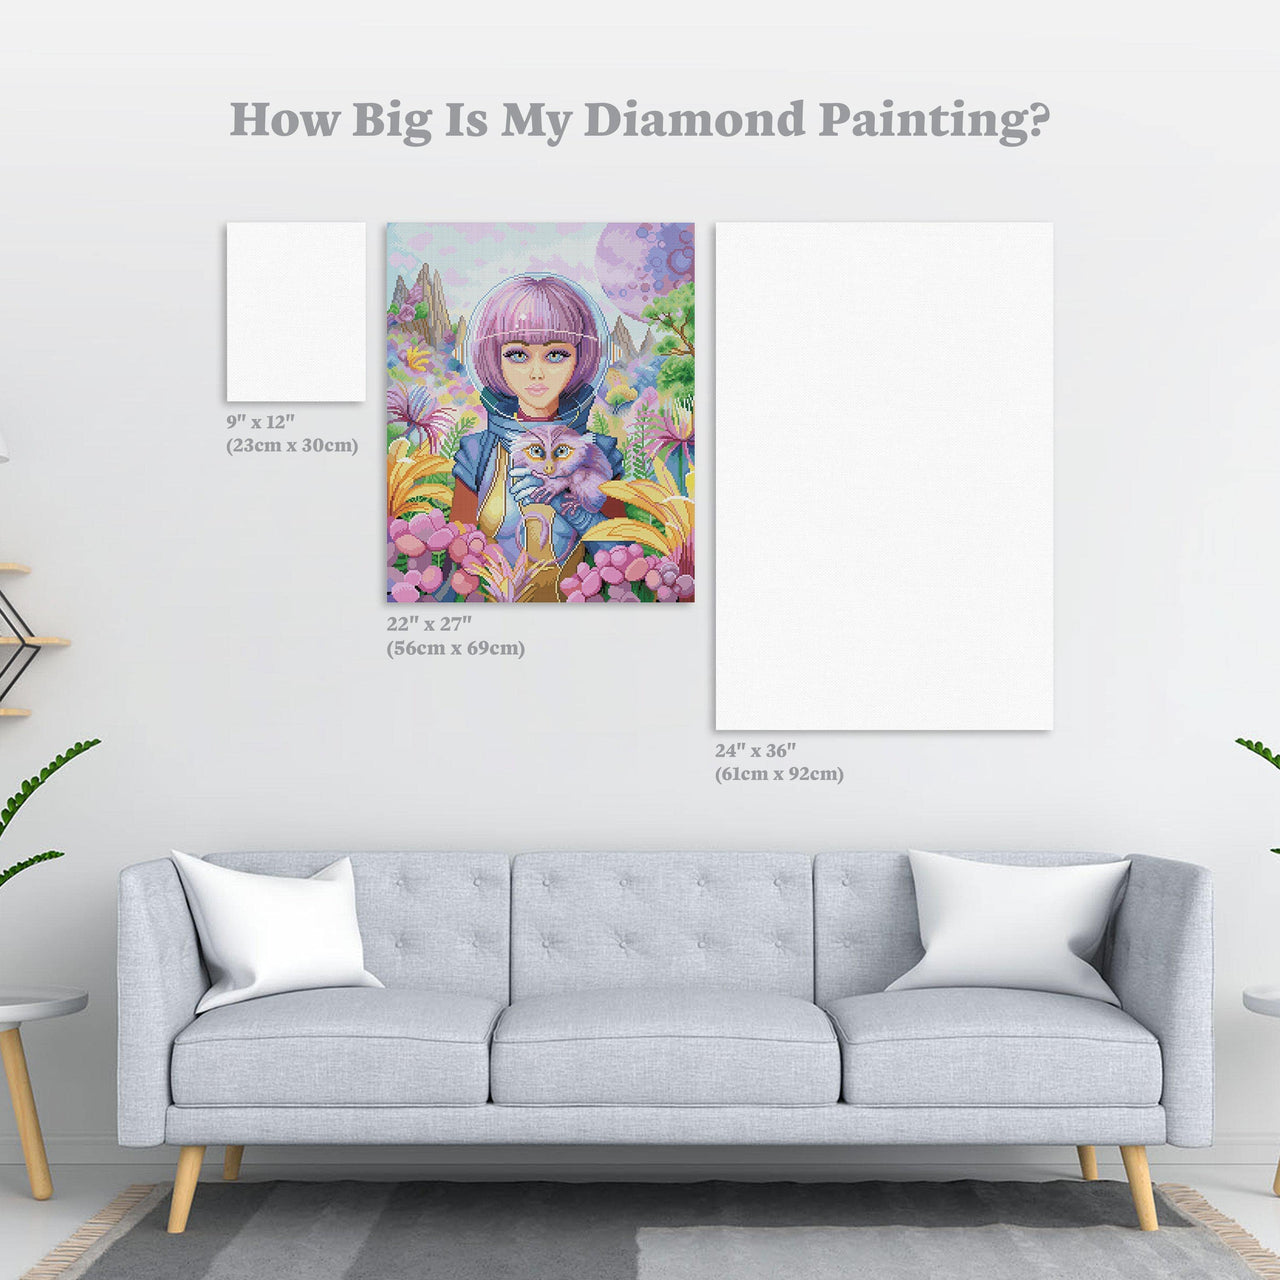 Diamond Painting Close Encounters 22" x 27″ (56cm x 69cm) / Round with 66 Colors including 4 ABs / 48,954